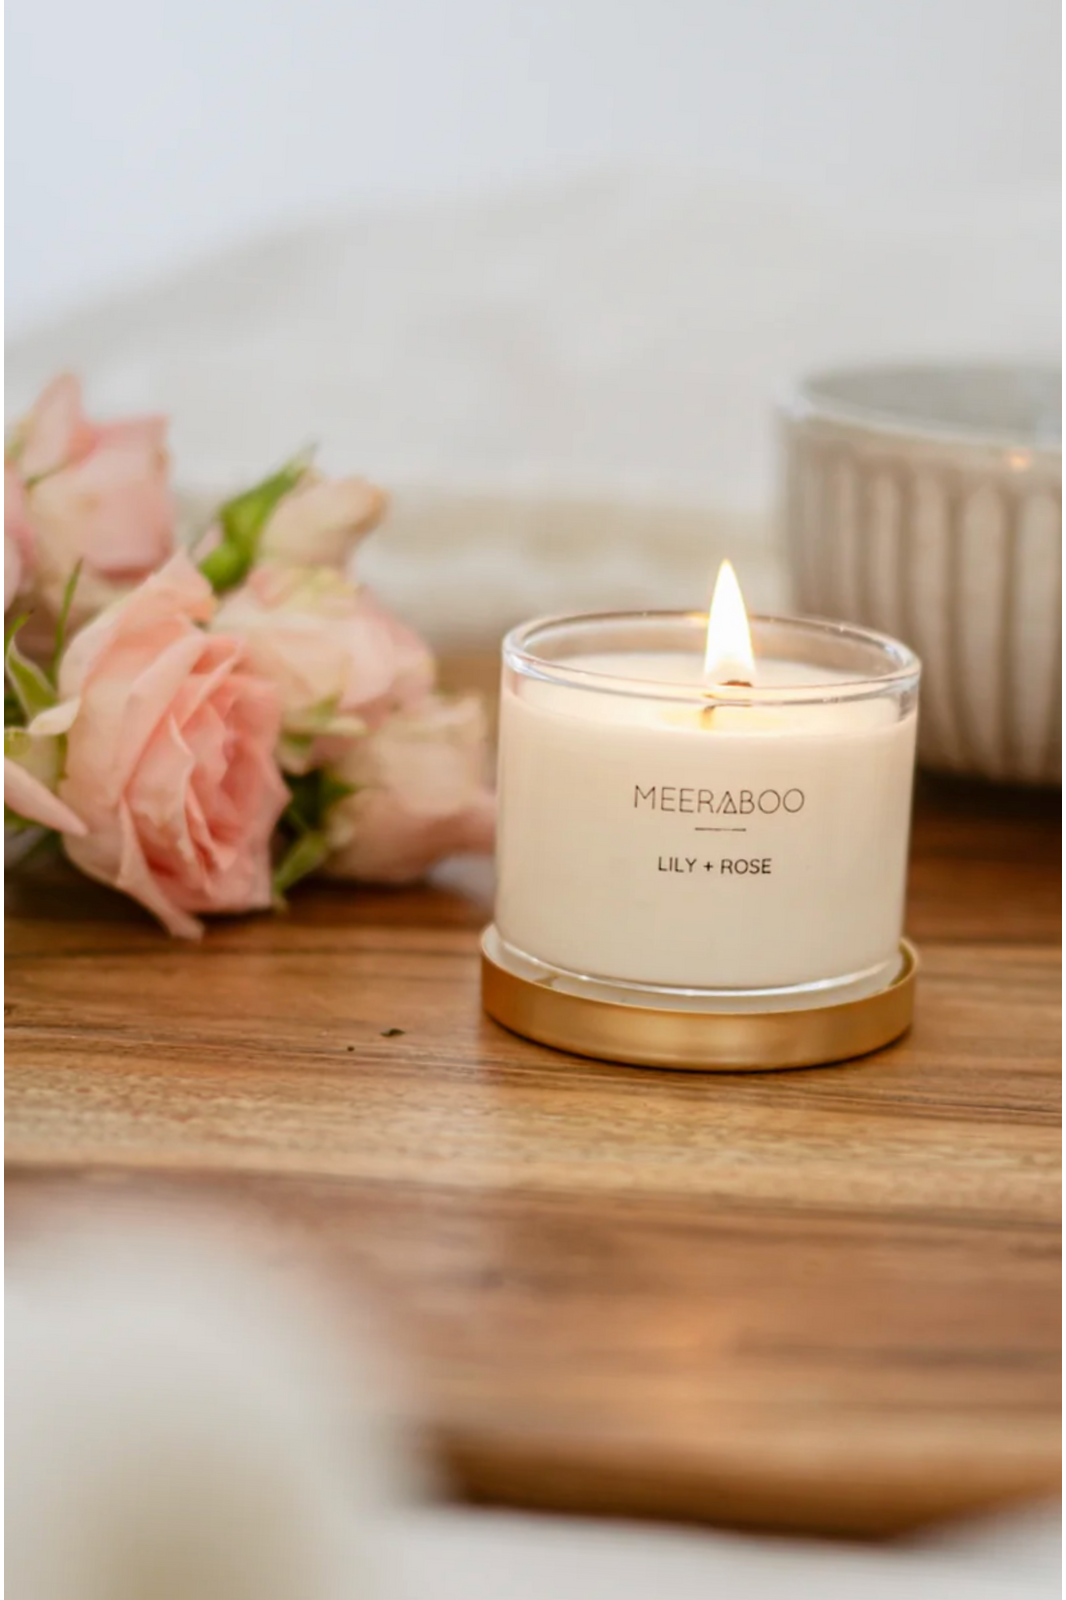 Meeraboo Candle Golden Girl Mini Candle in Lily + Rose